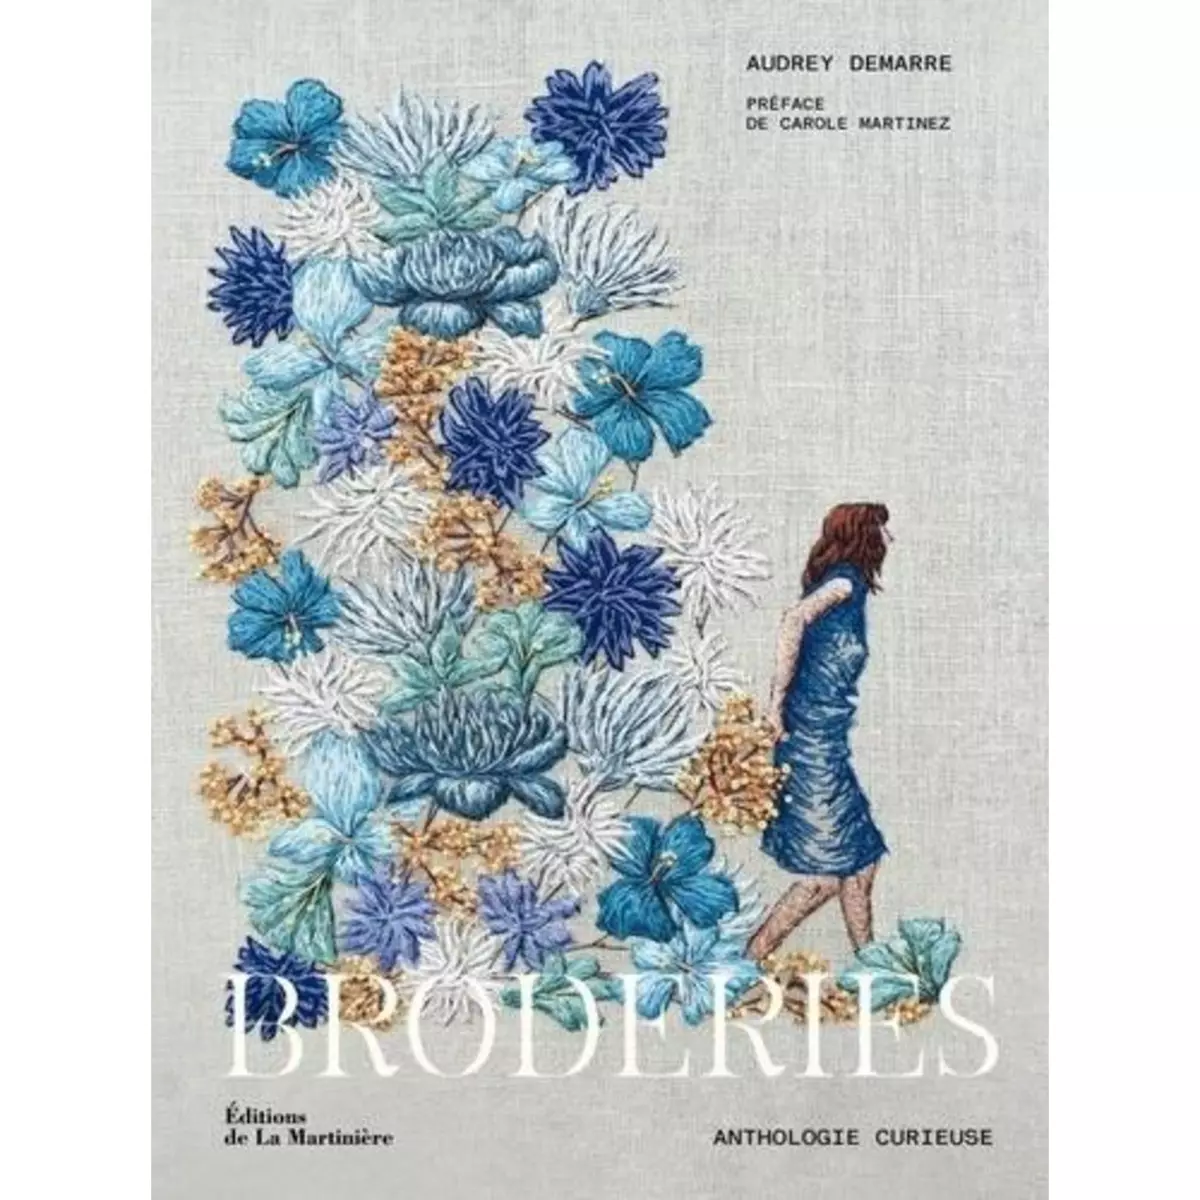  BRODERIES. ANTHOLOGIE CURIEUSE, Demarre Audrey